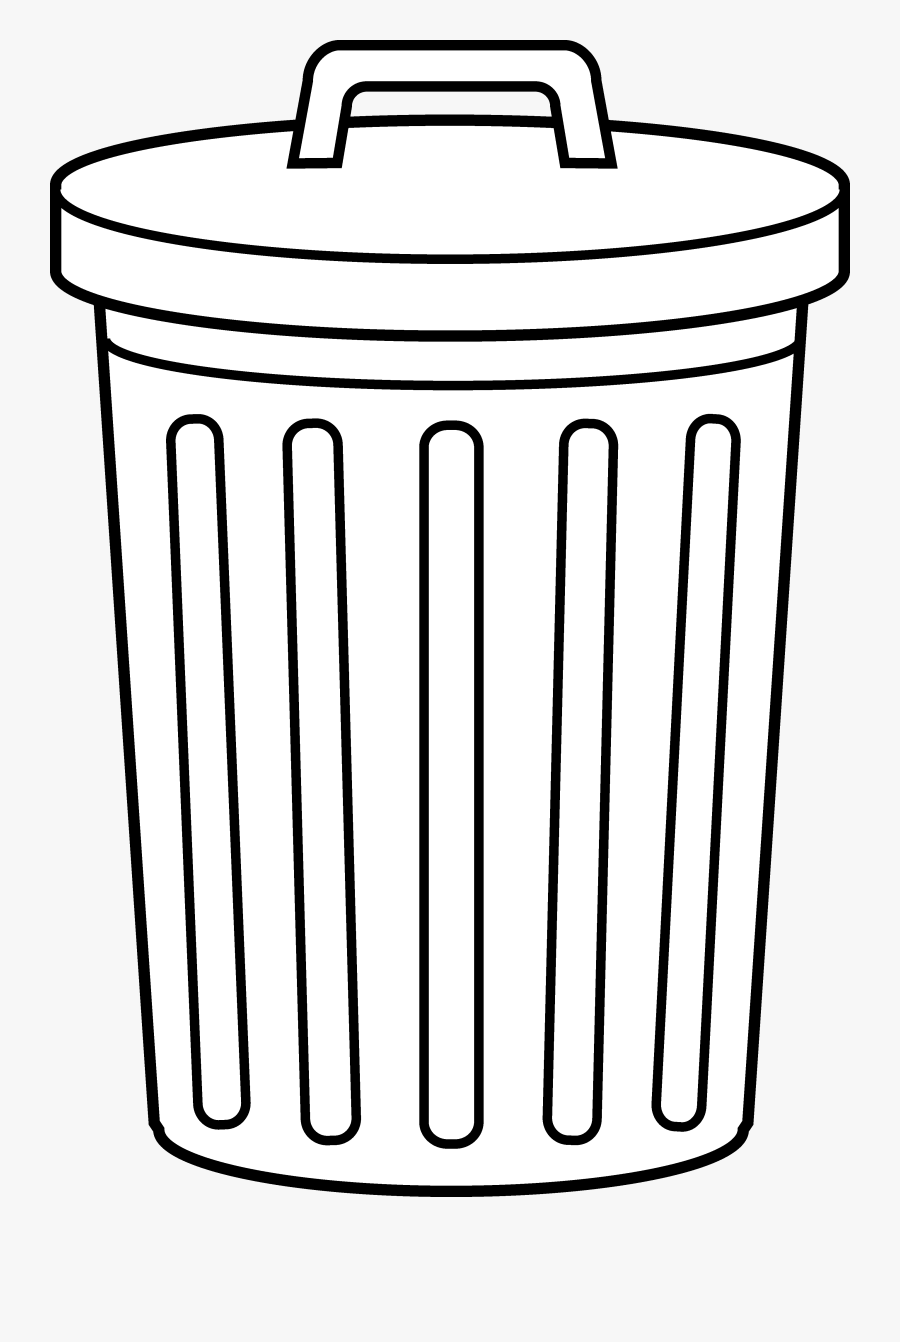 Classroom Clipart Garbage Can - Trash Can Black And White, Transparent Clipart